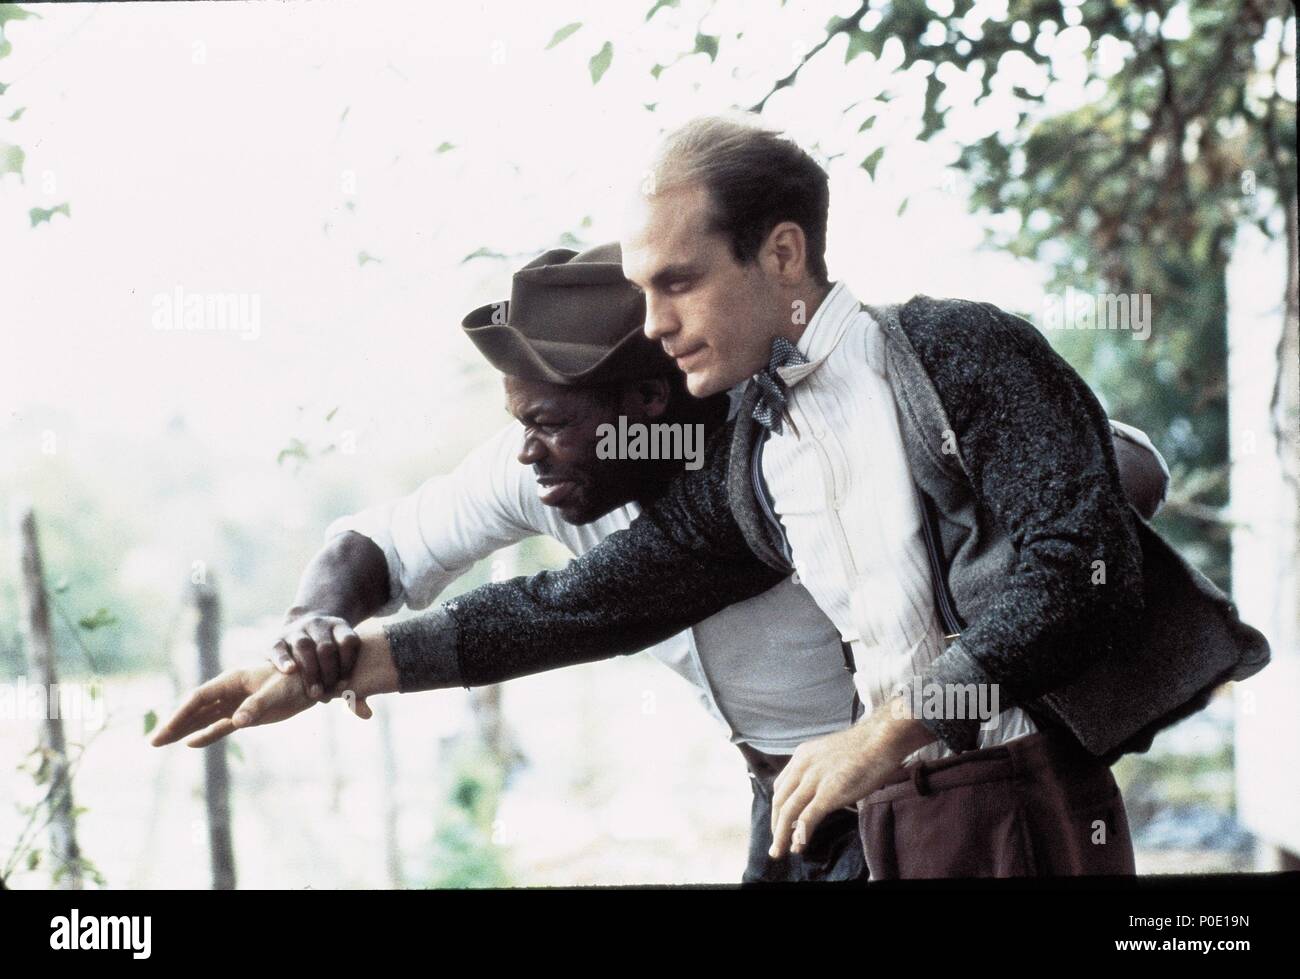 Original Film Title: PLACES IN THE HEART.  English Title: PLACES IN THE HEART.  Film Director: ROBERT BENTON.  Year: 1984.  Stars: DANNY GLOVER; JOHN MALKOVICH. Credit: TRI STAR PICTURES / Album Stock Photo